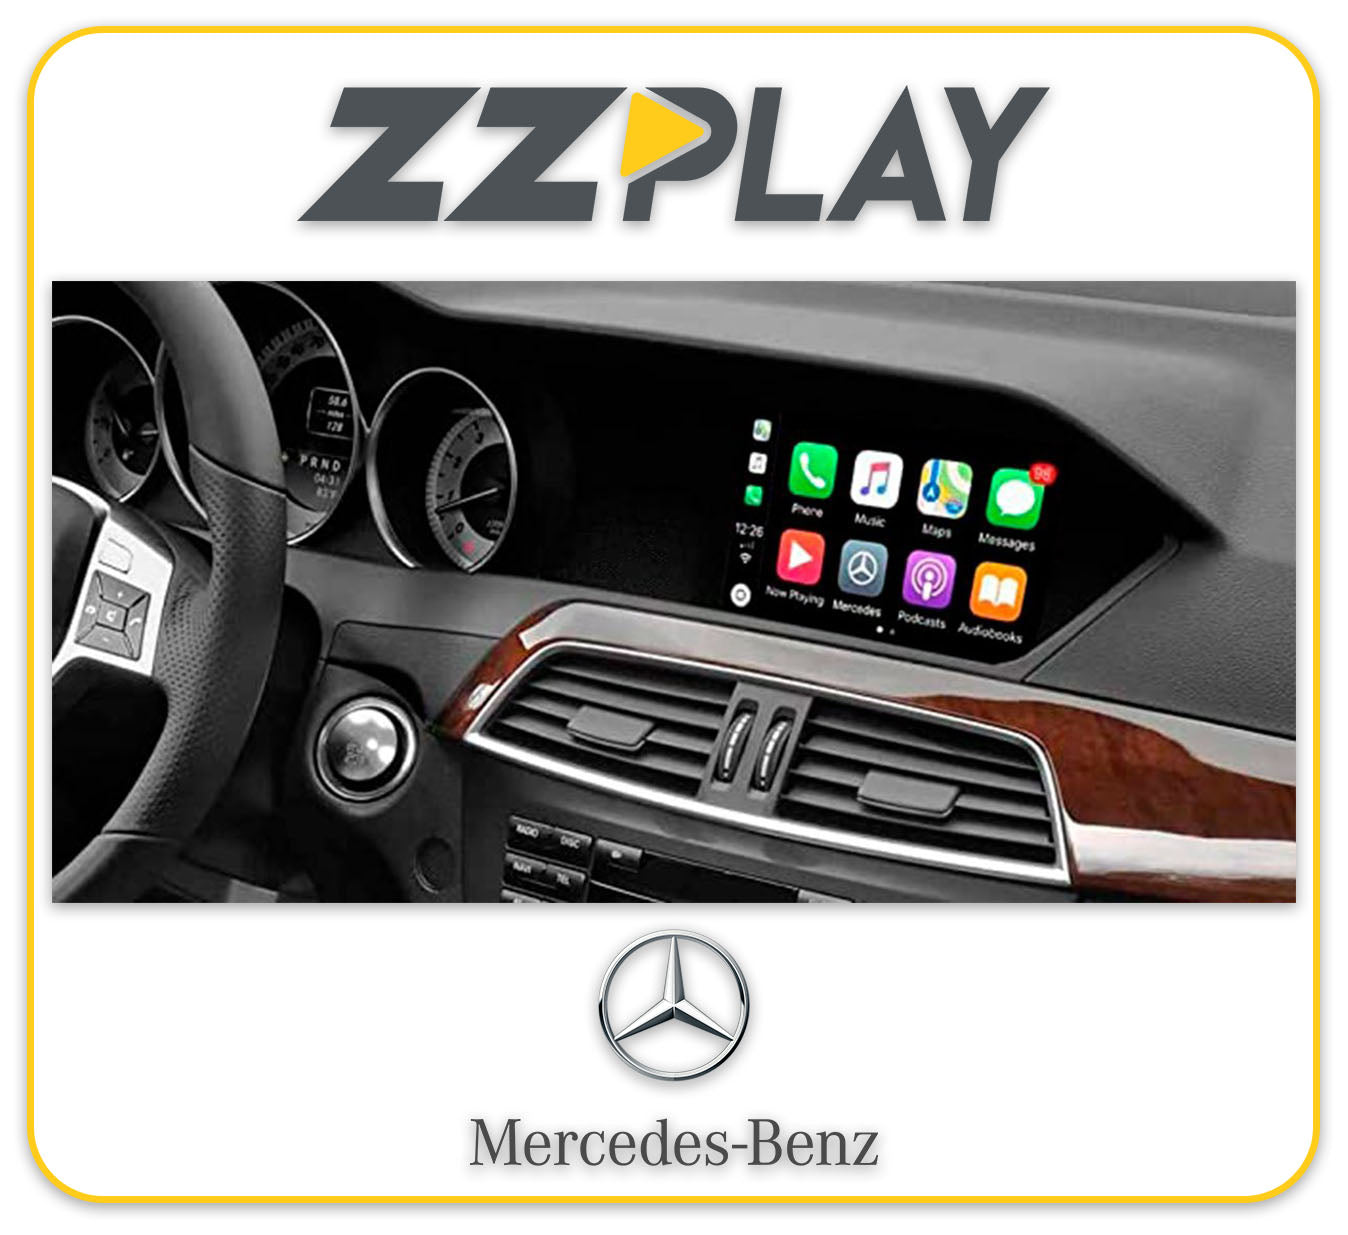 Apple CarPlay & Android Auto Add On for Mercedes Benz C Class